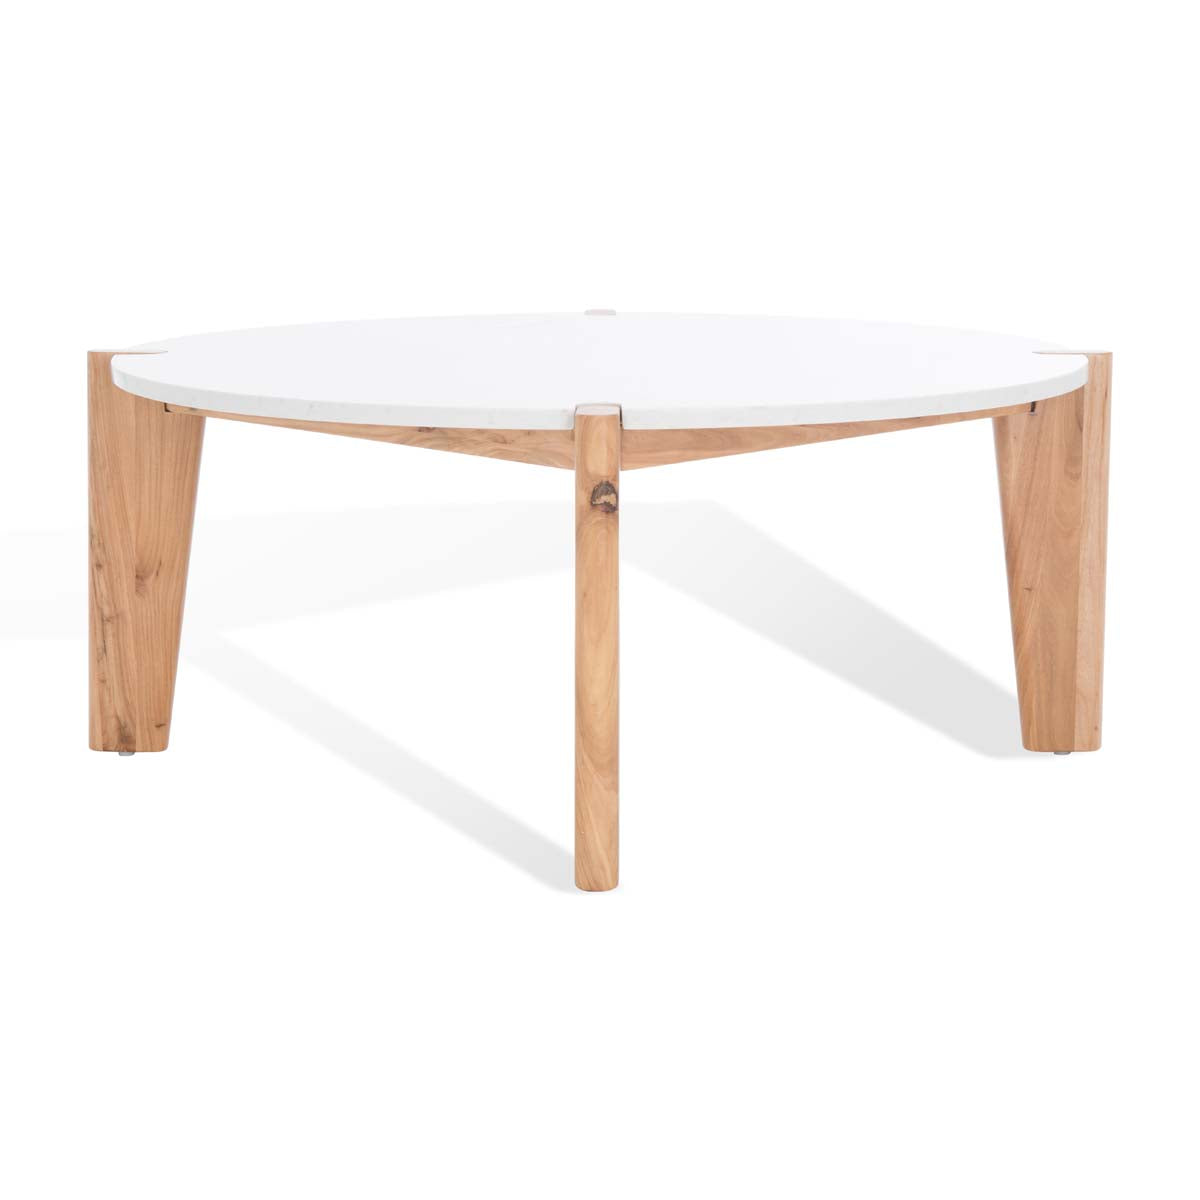 Safavieh Couture Garcia Marble Top Coffee Table - Natural / White